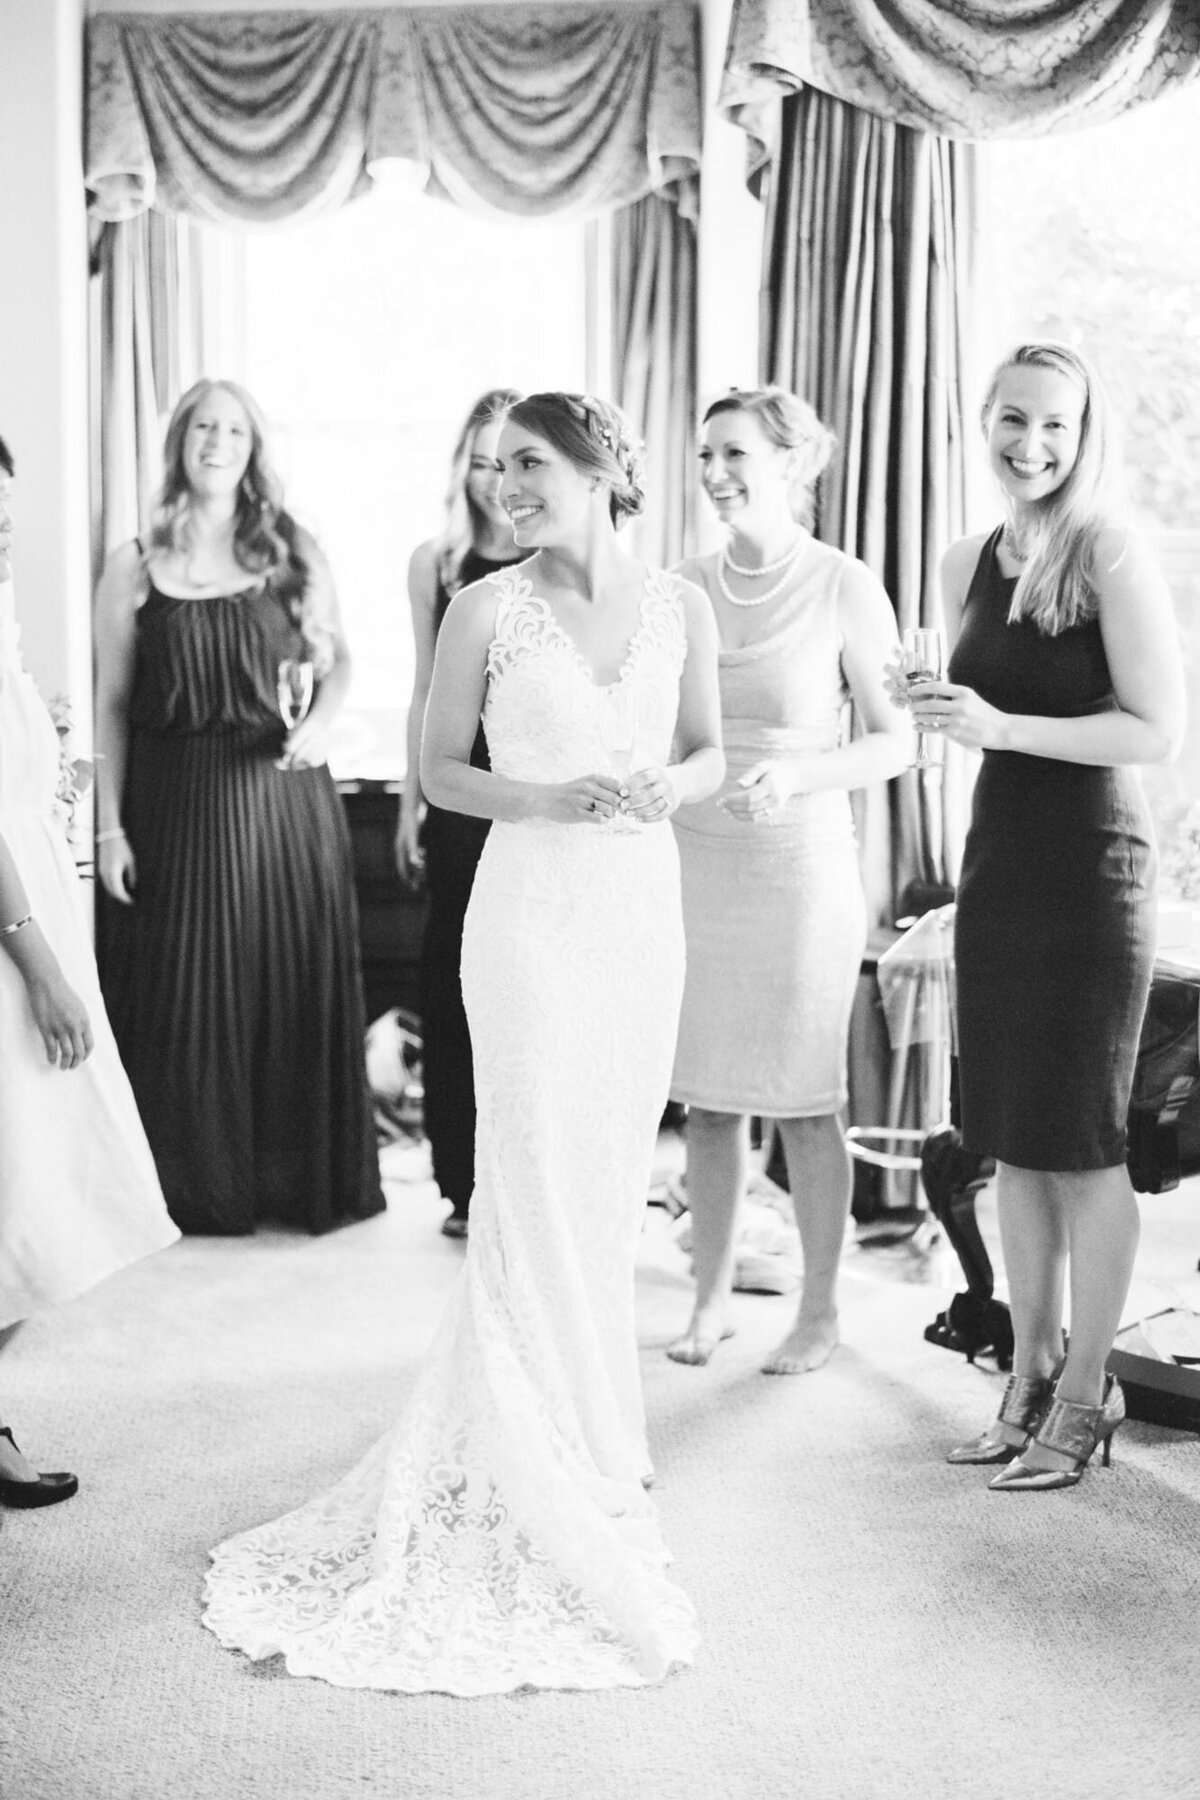 Bride shows her dress off to her wedding bridesmaids.